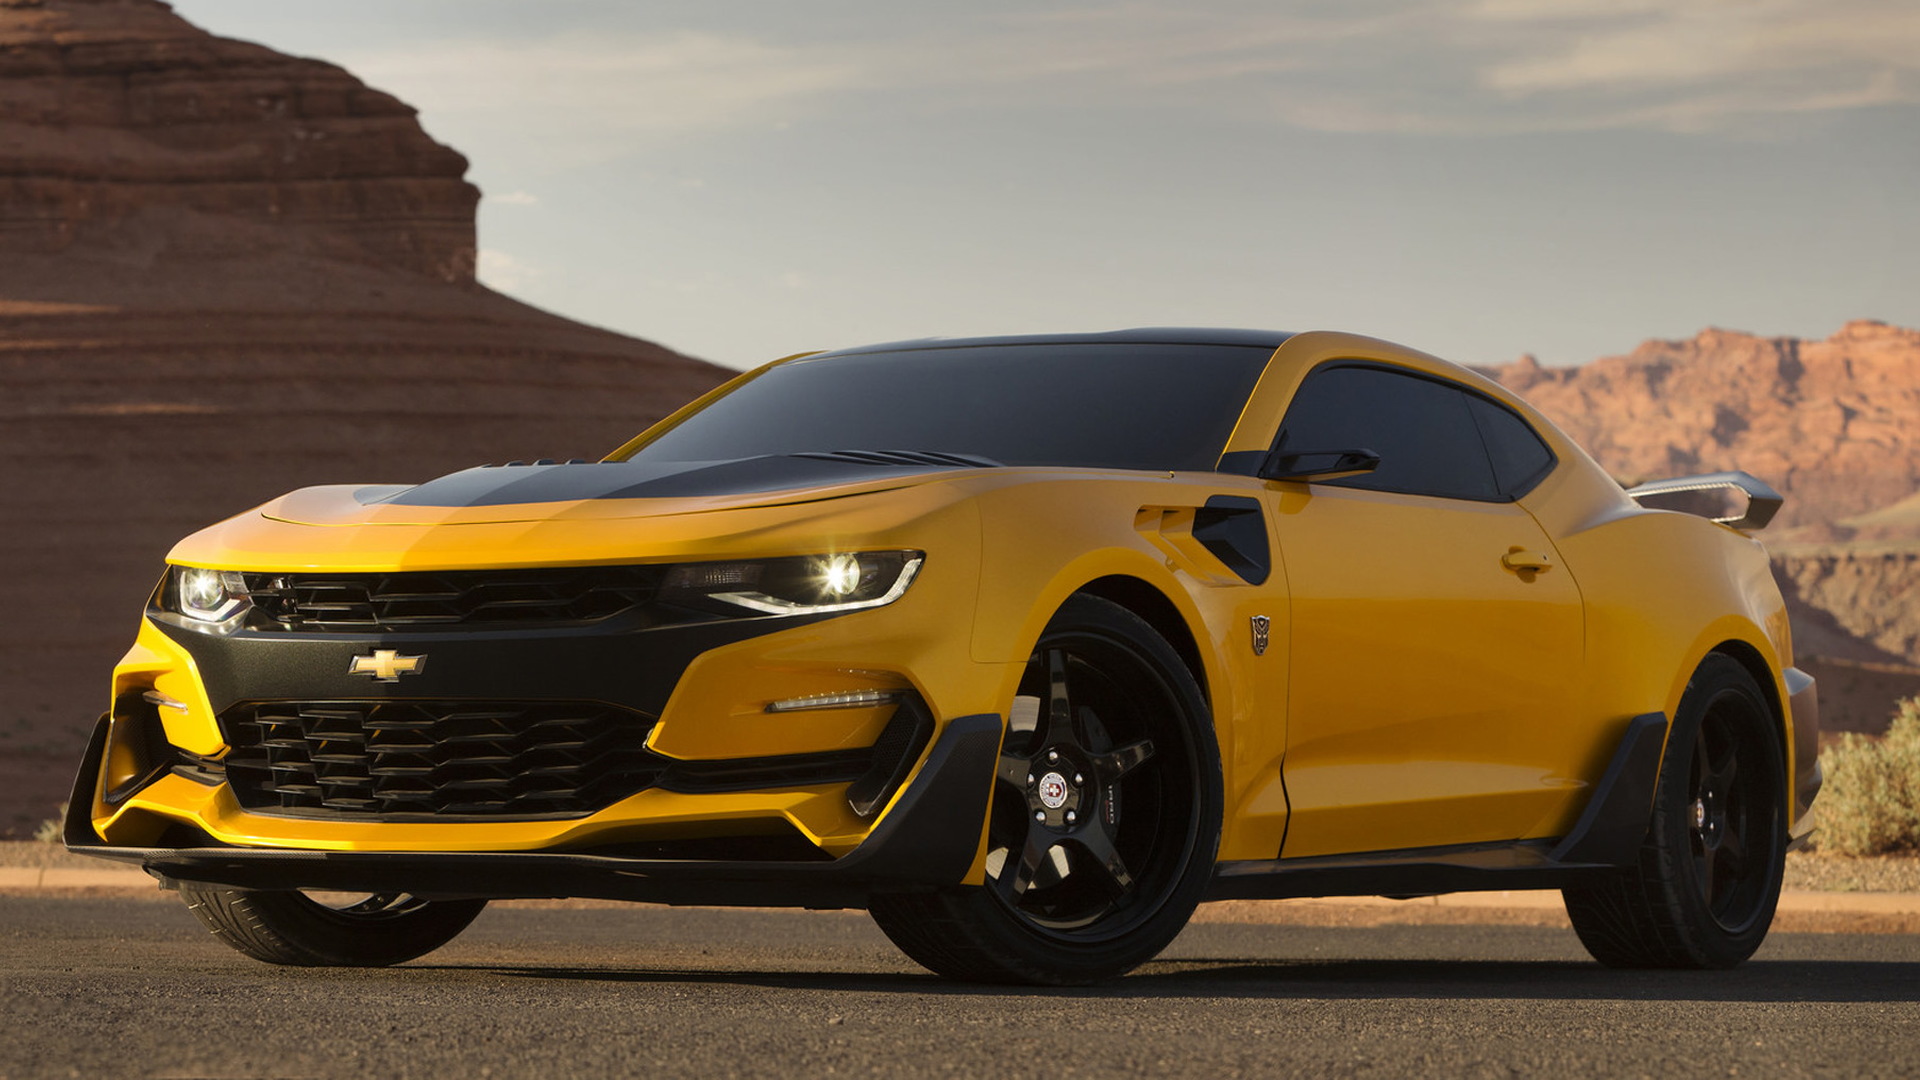 Bumblebee Chevrolet Camaro from 'Transformers: The Last Knight'